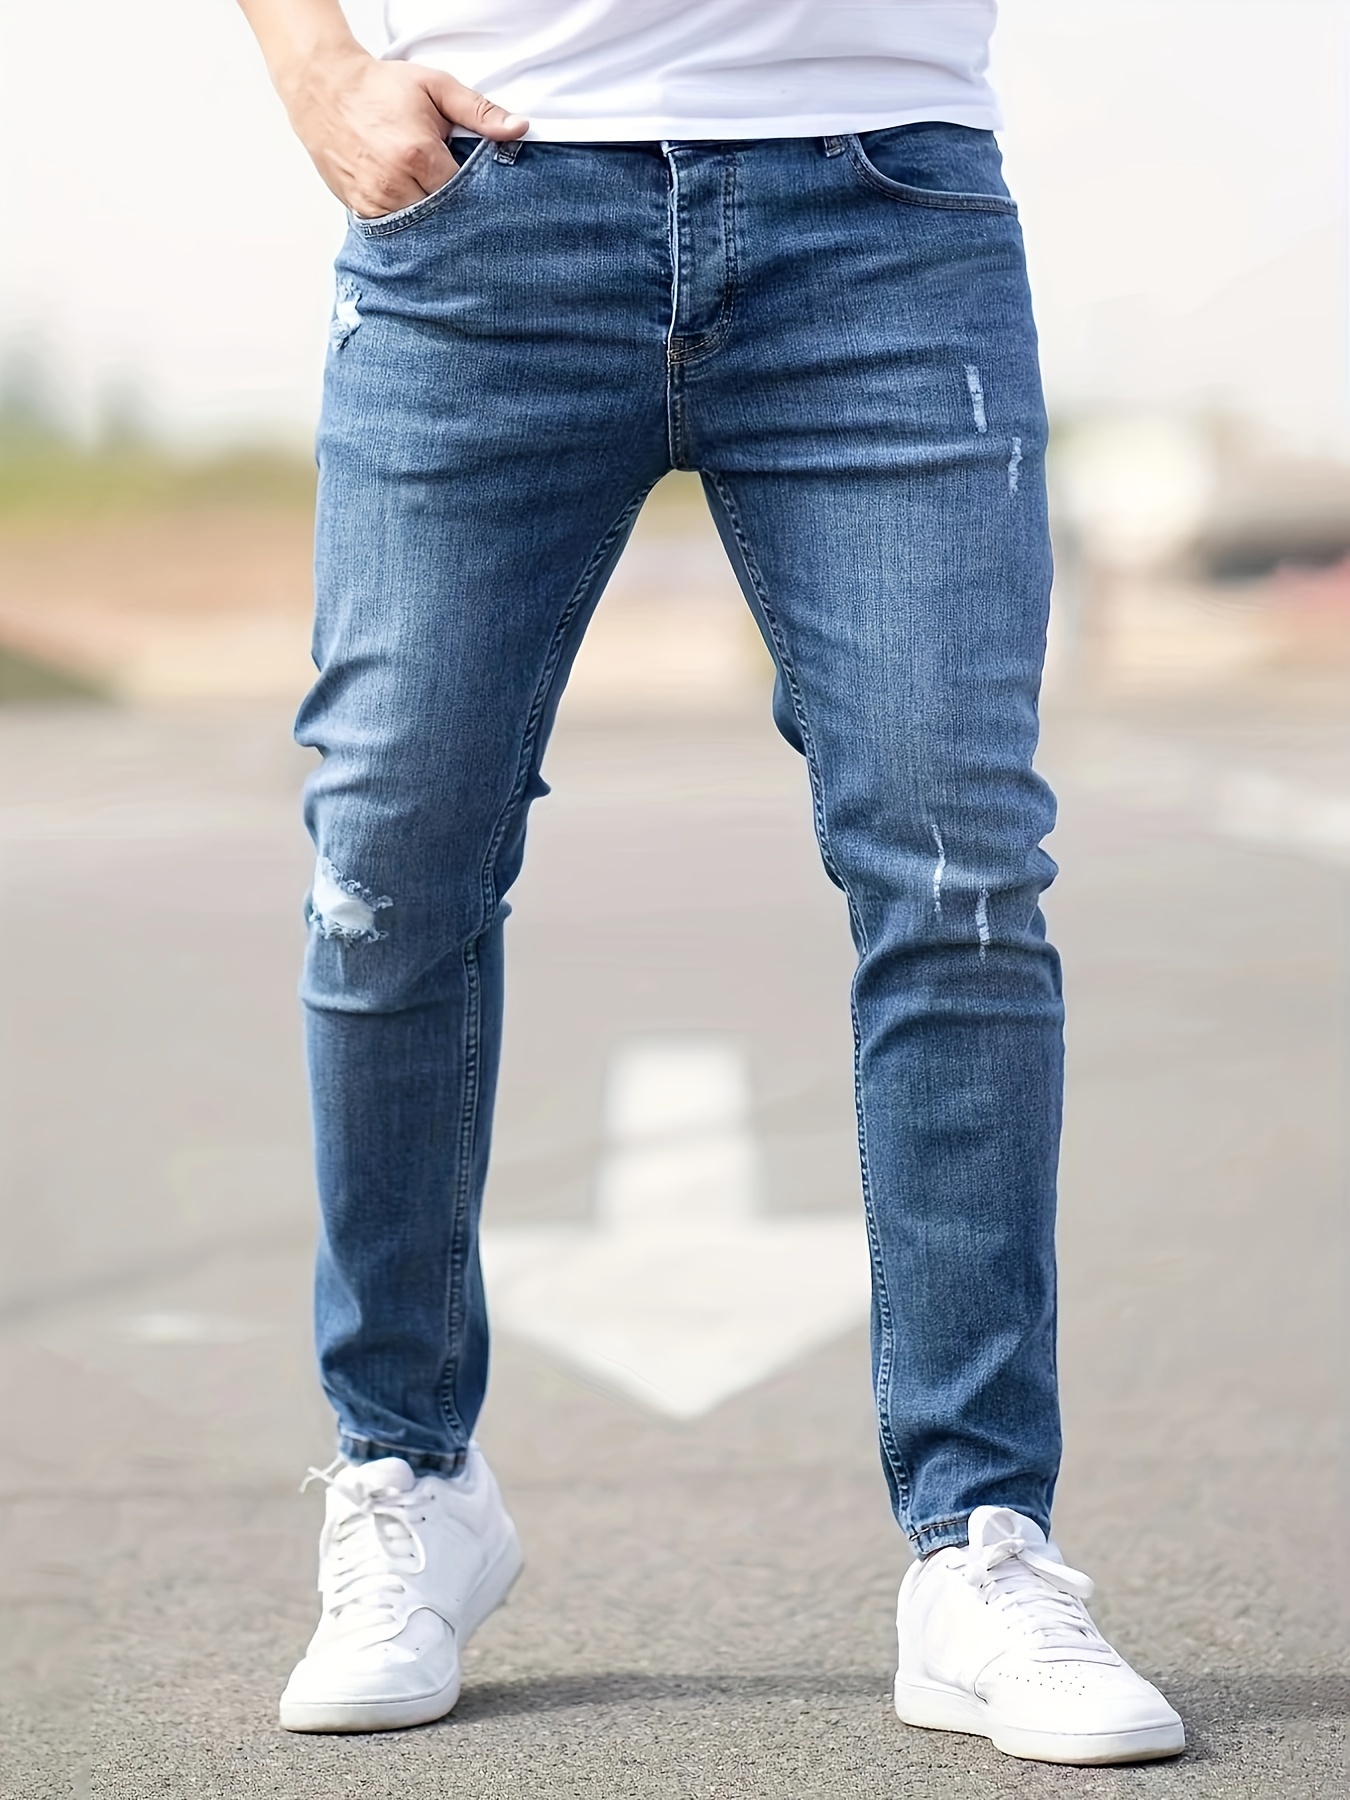 mens jeans wholesale in bd